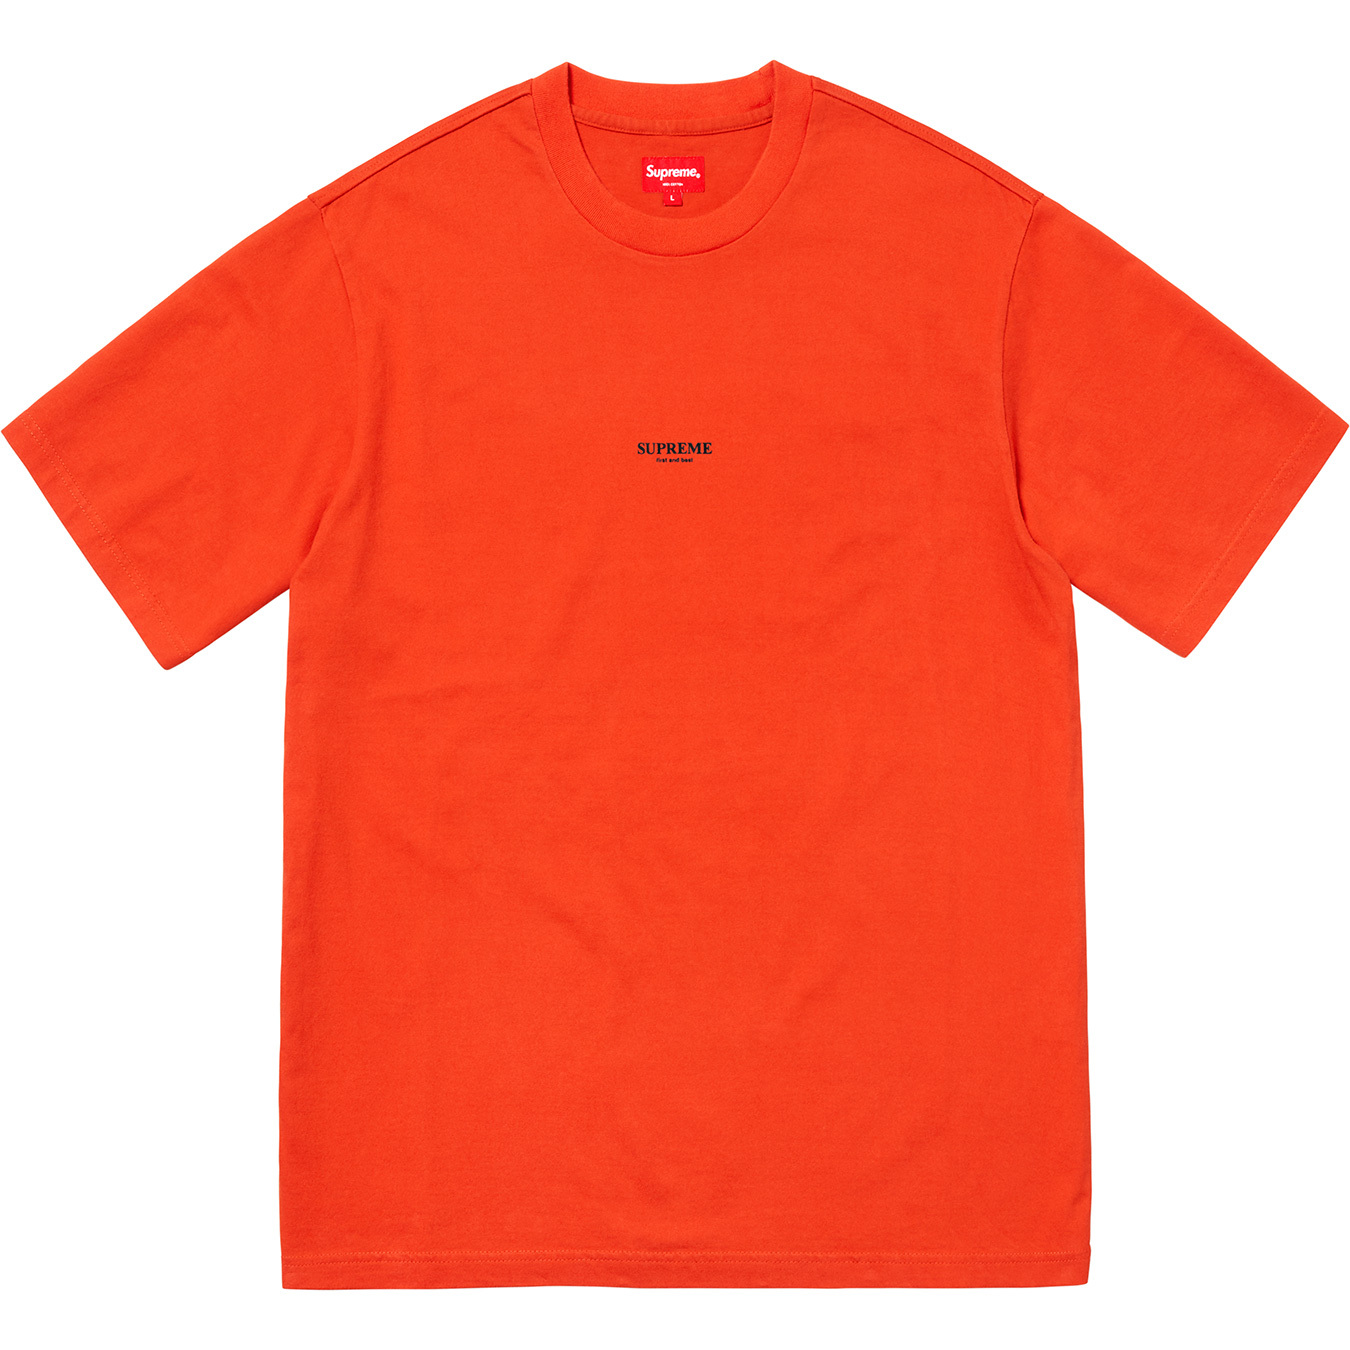 First & Best Tee - fall winter 2018 - Supreme